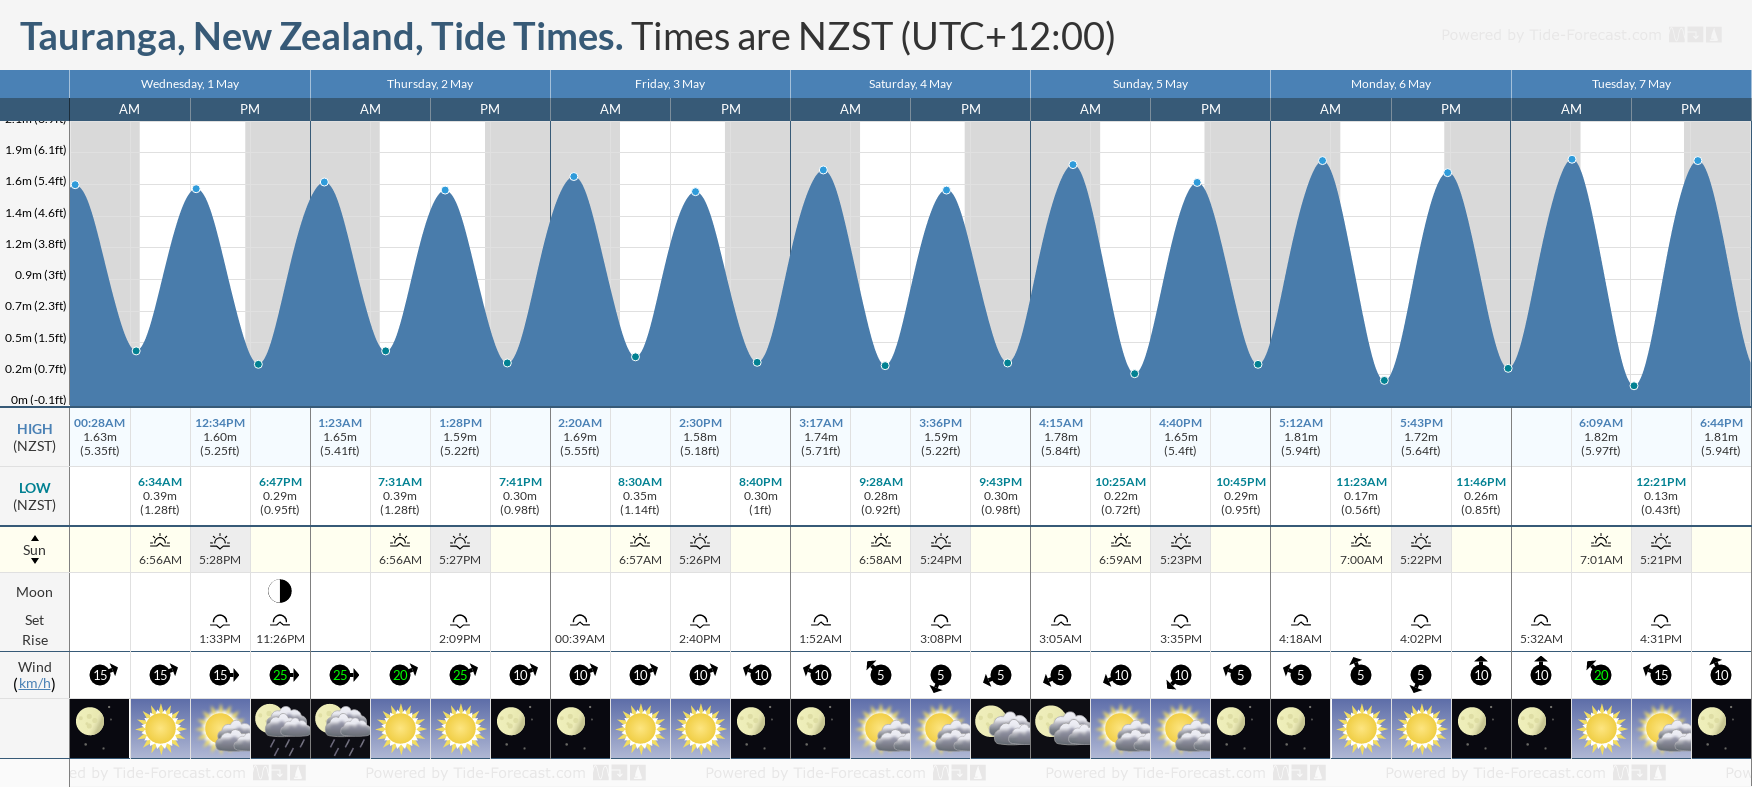 Tauranga, New Zealand Tide Chart including high and low tide tide times for the next 7 days